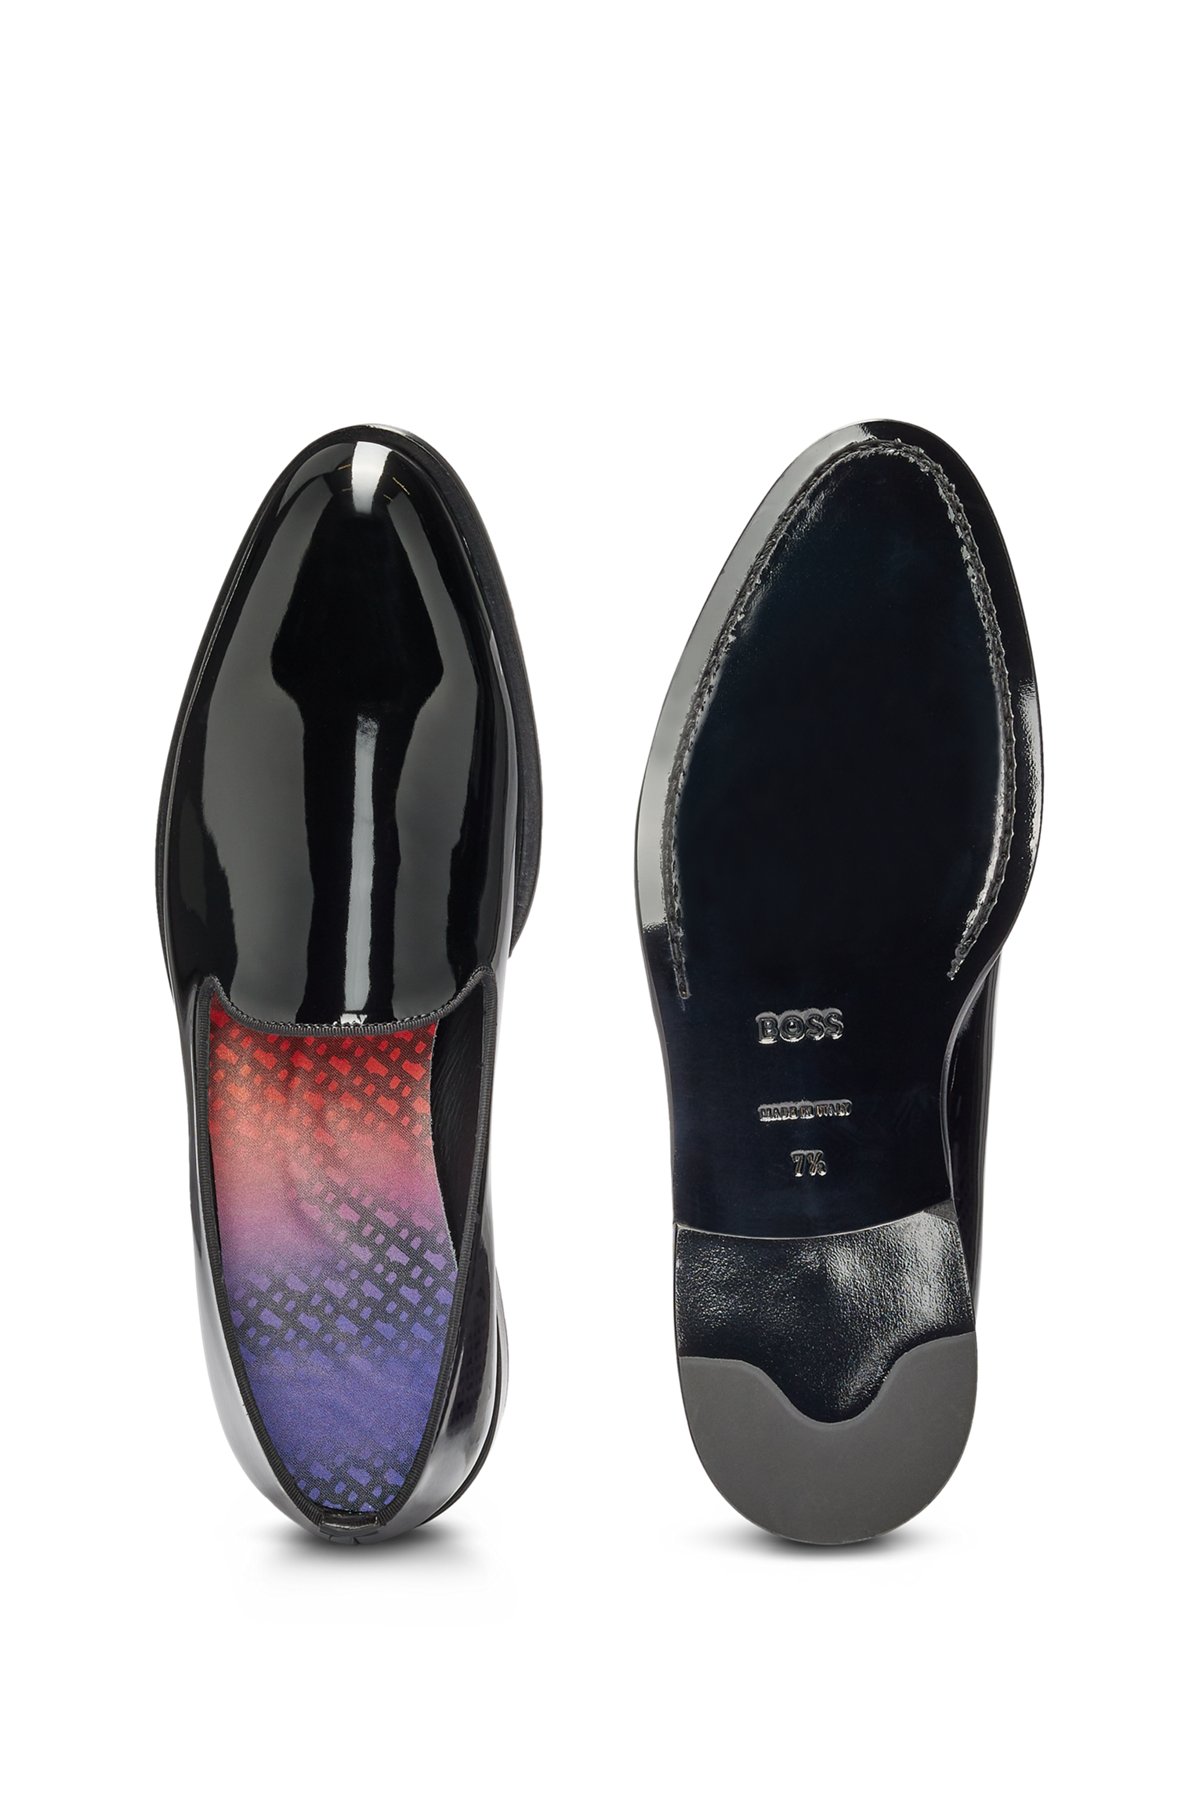 Italian-made loafers in leather with degradé monogram detailing, Black